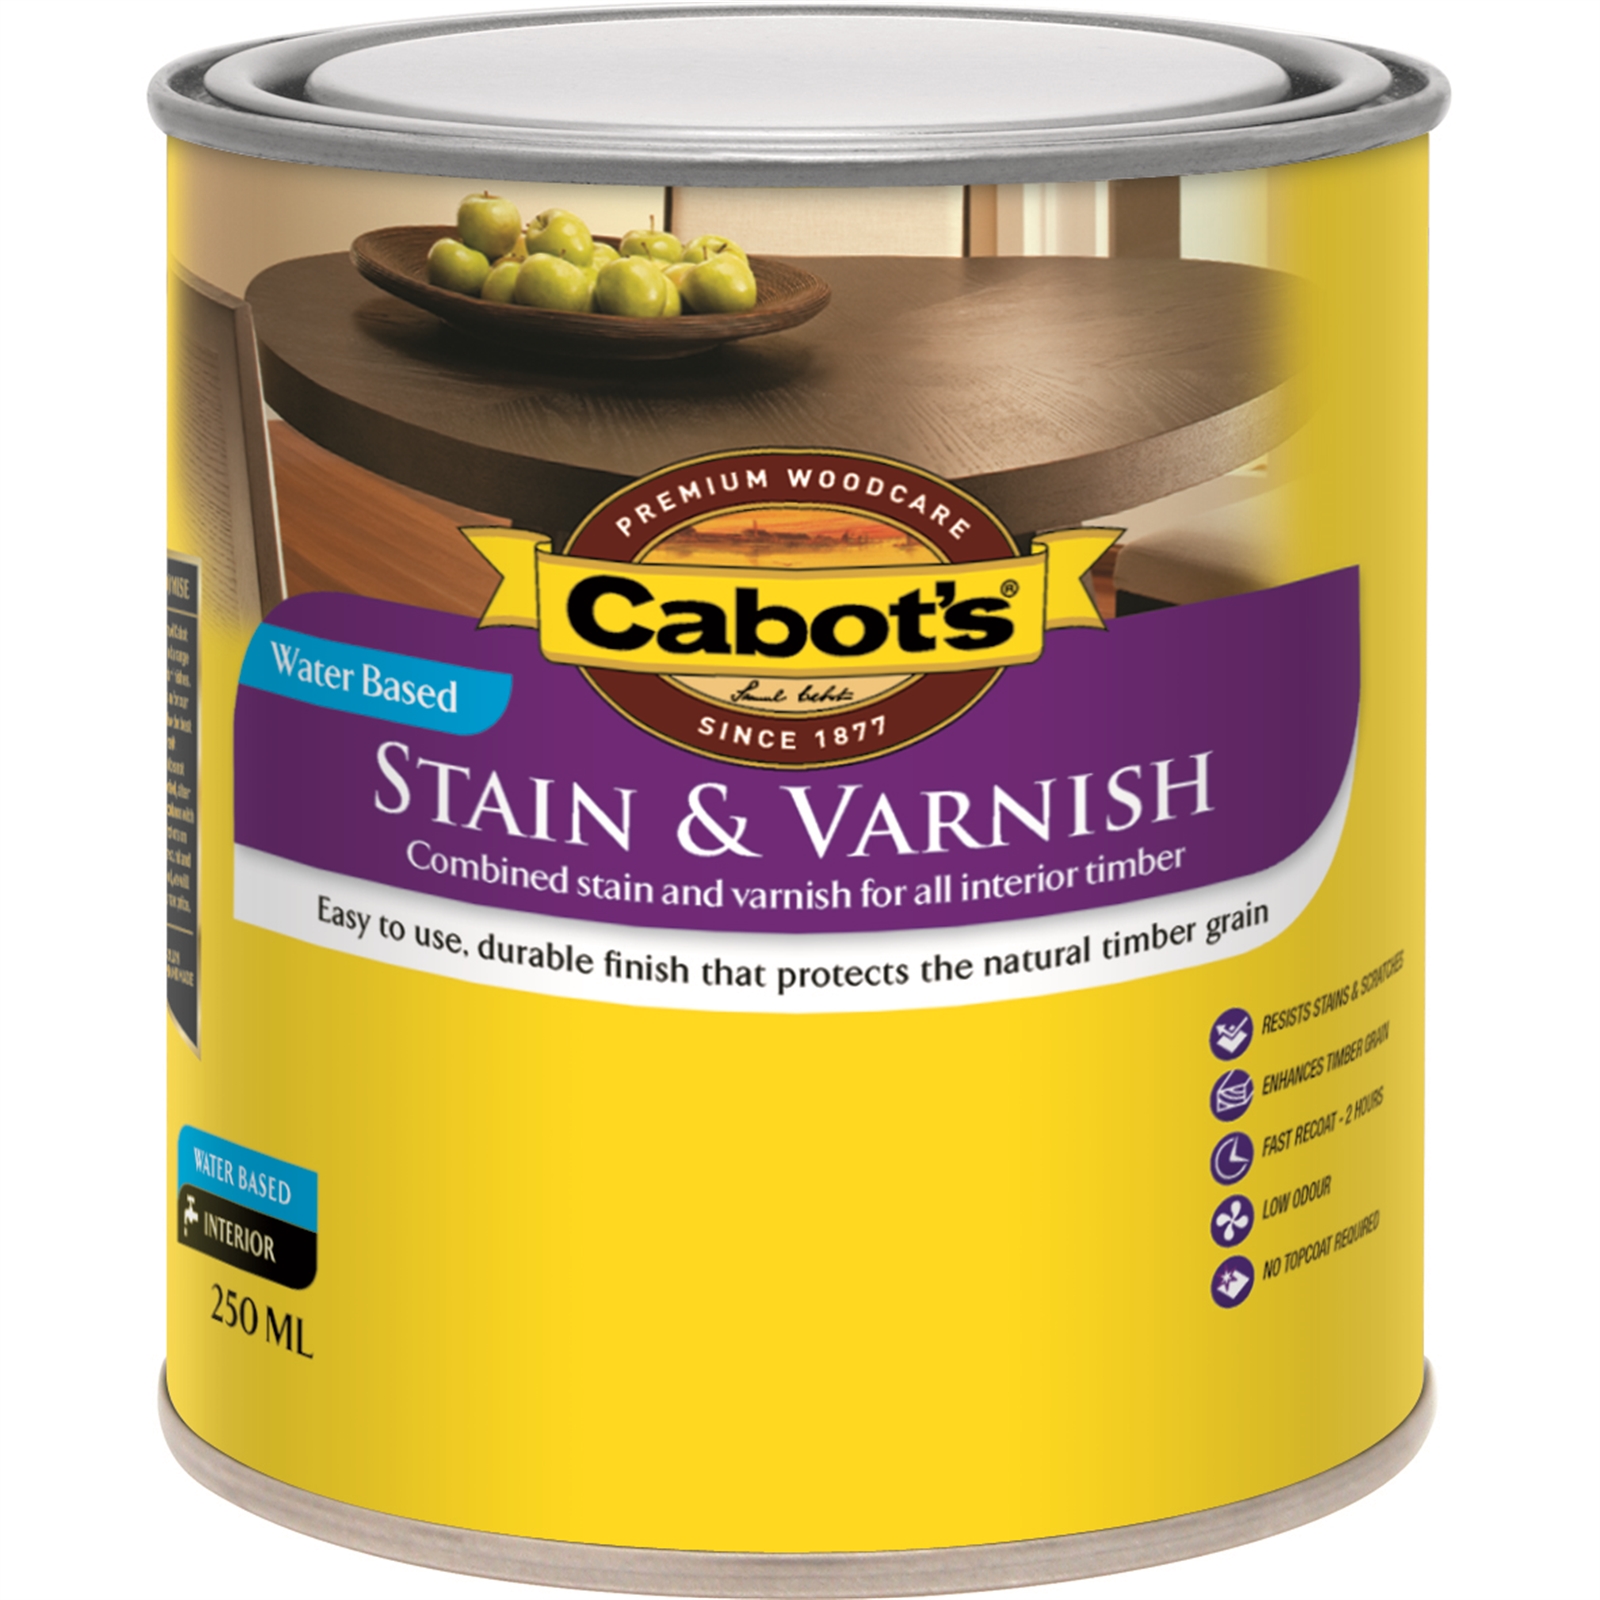 Cabot's 250ml Gloss Jarrah Water Based Stain and Varnish